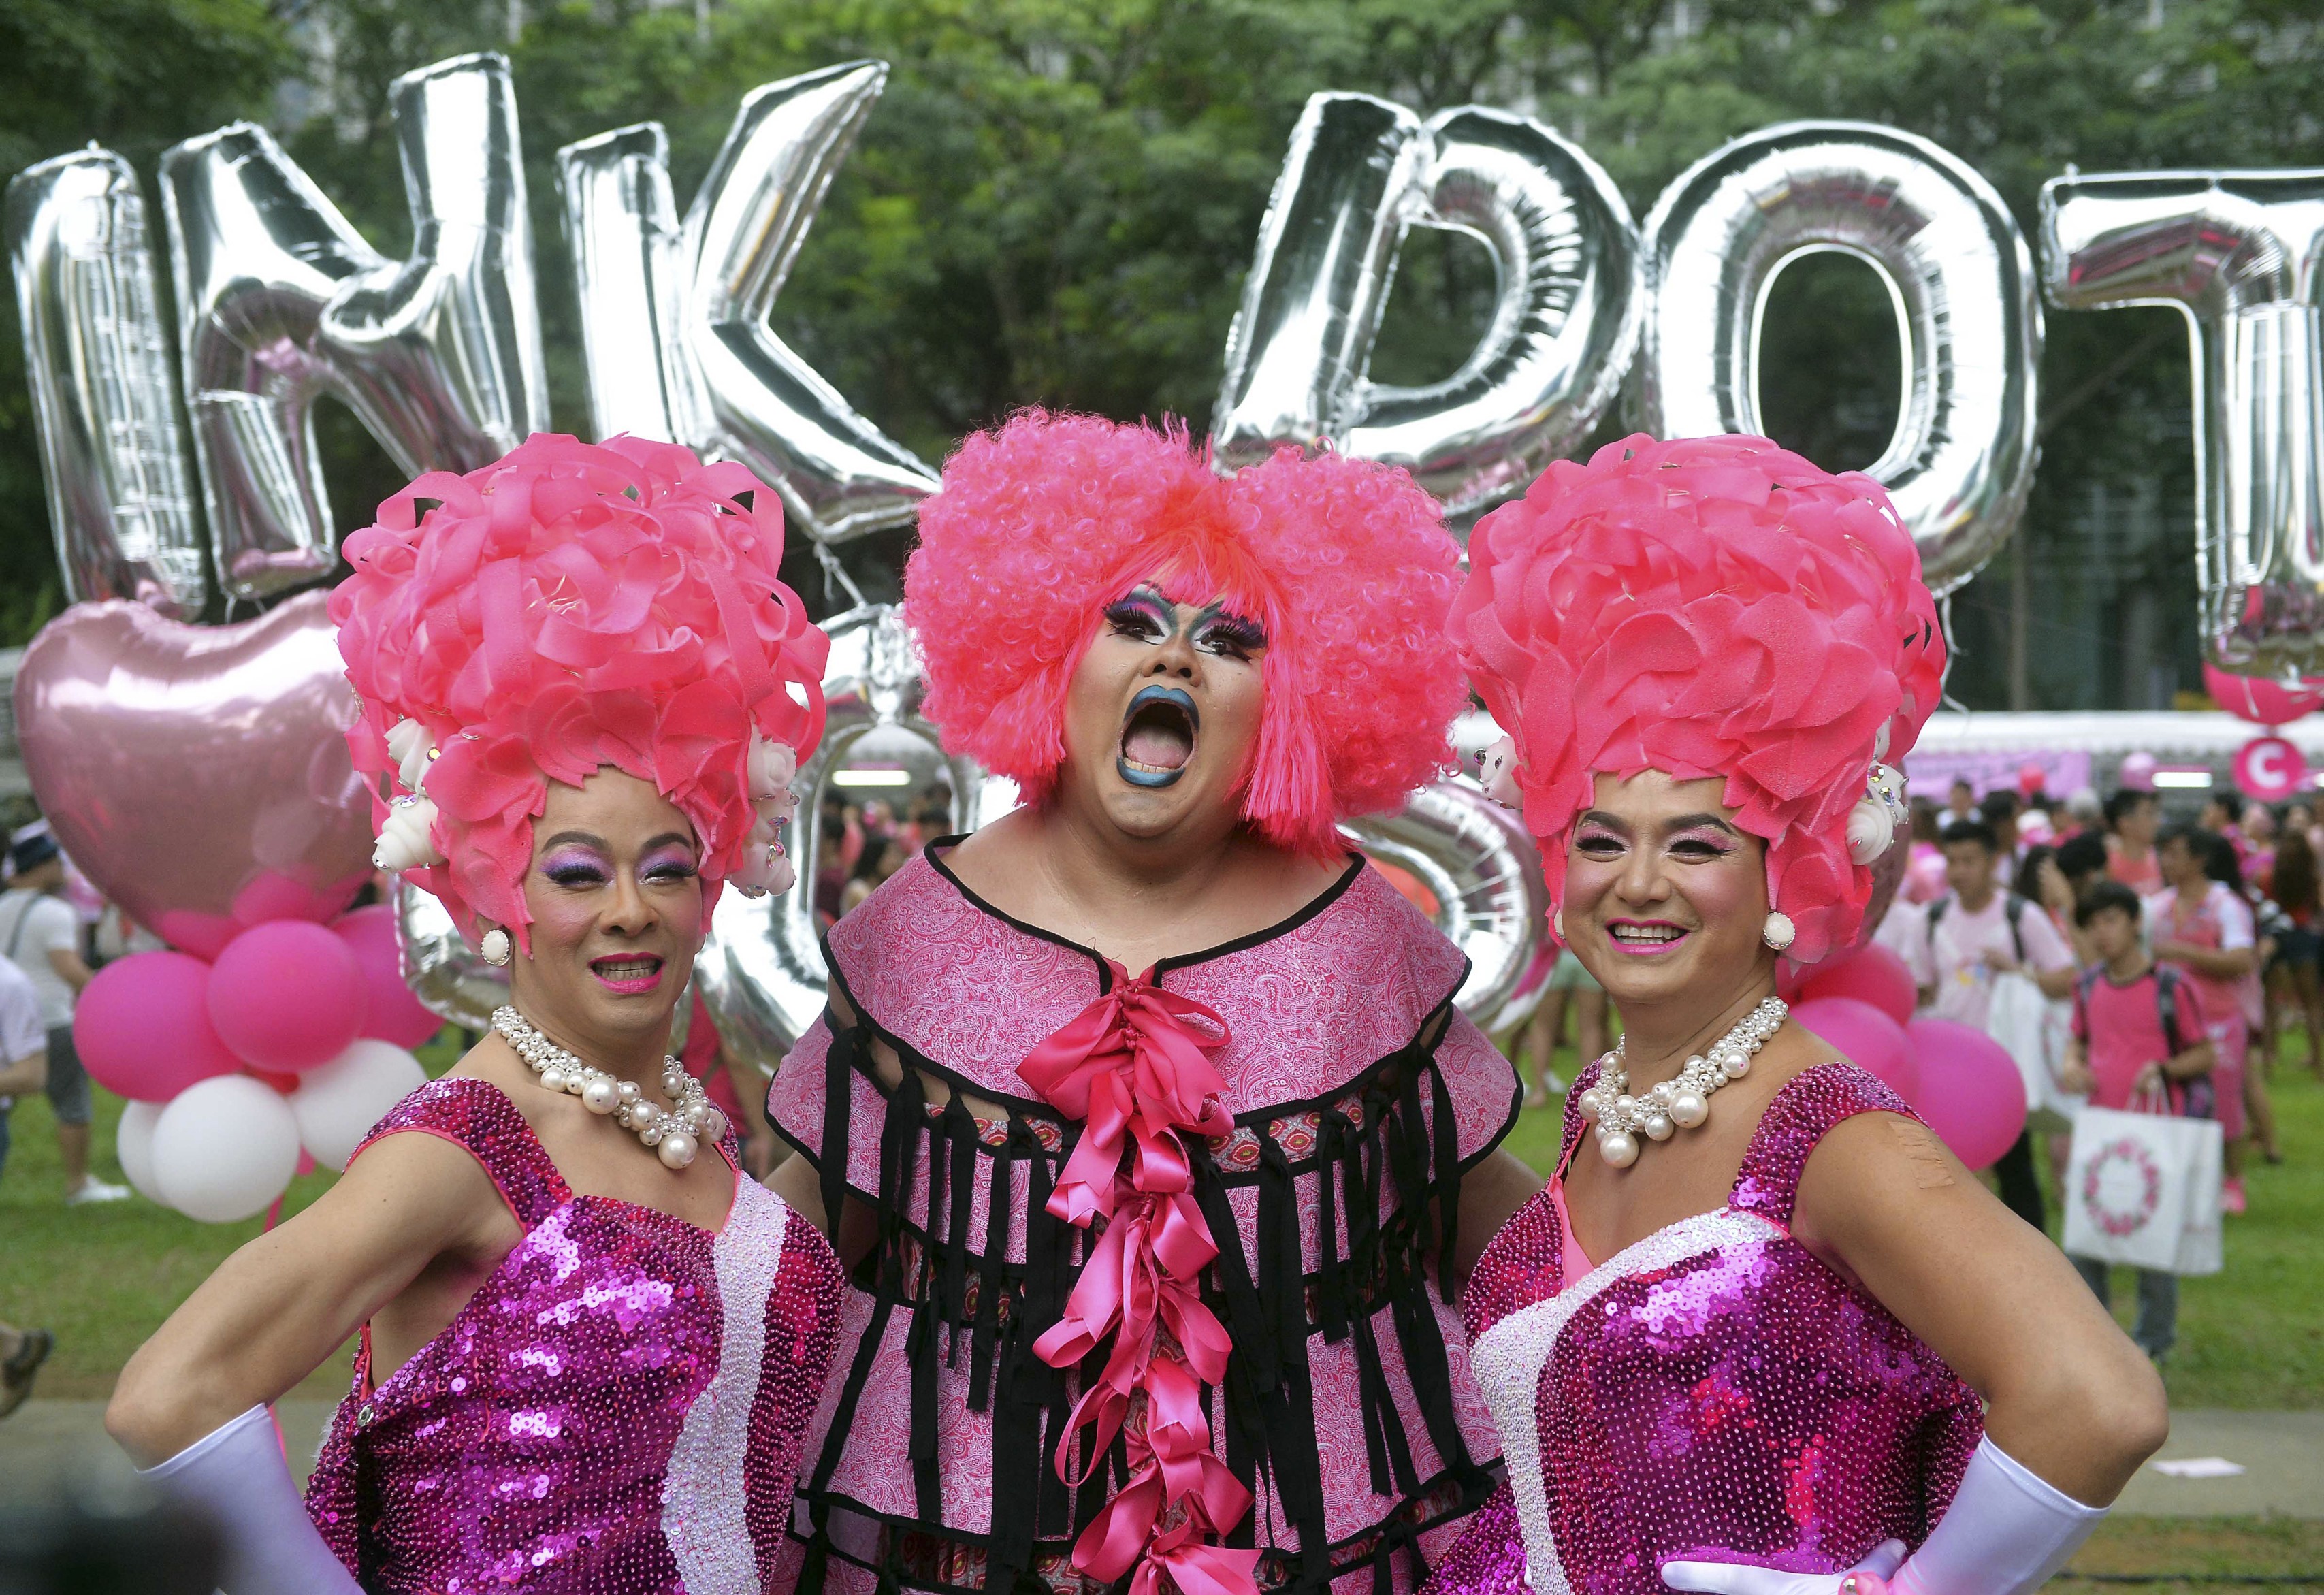 Participants dress up for the annual “Pink Dot” event in Singapore in 2015. The rally has been held every year since 2009 in support of LGBT rights. Photo: AFP